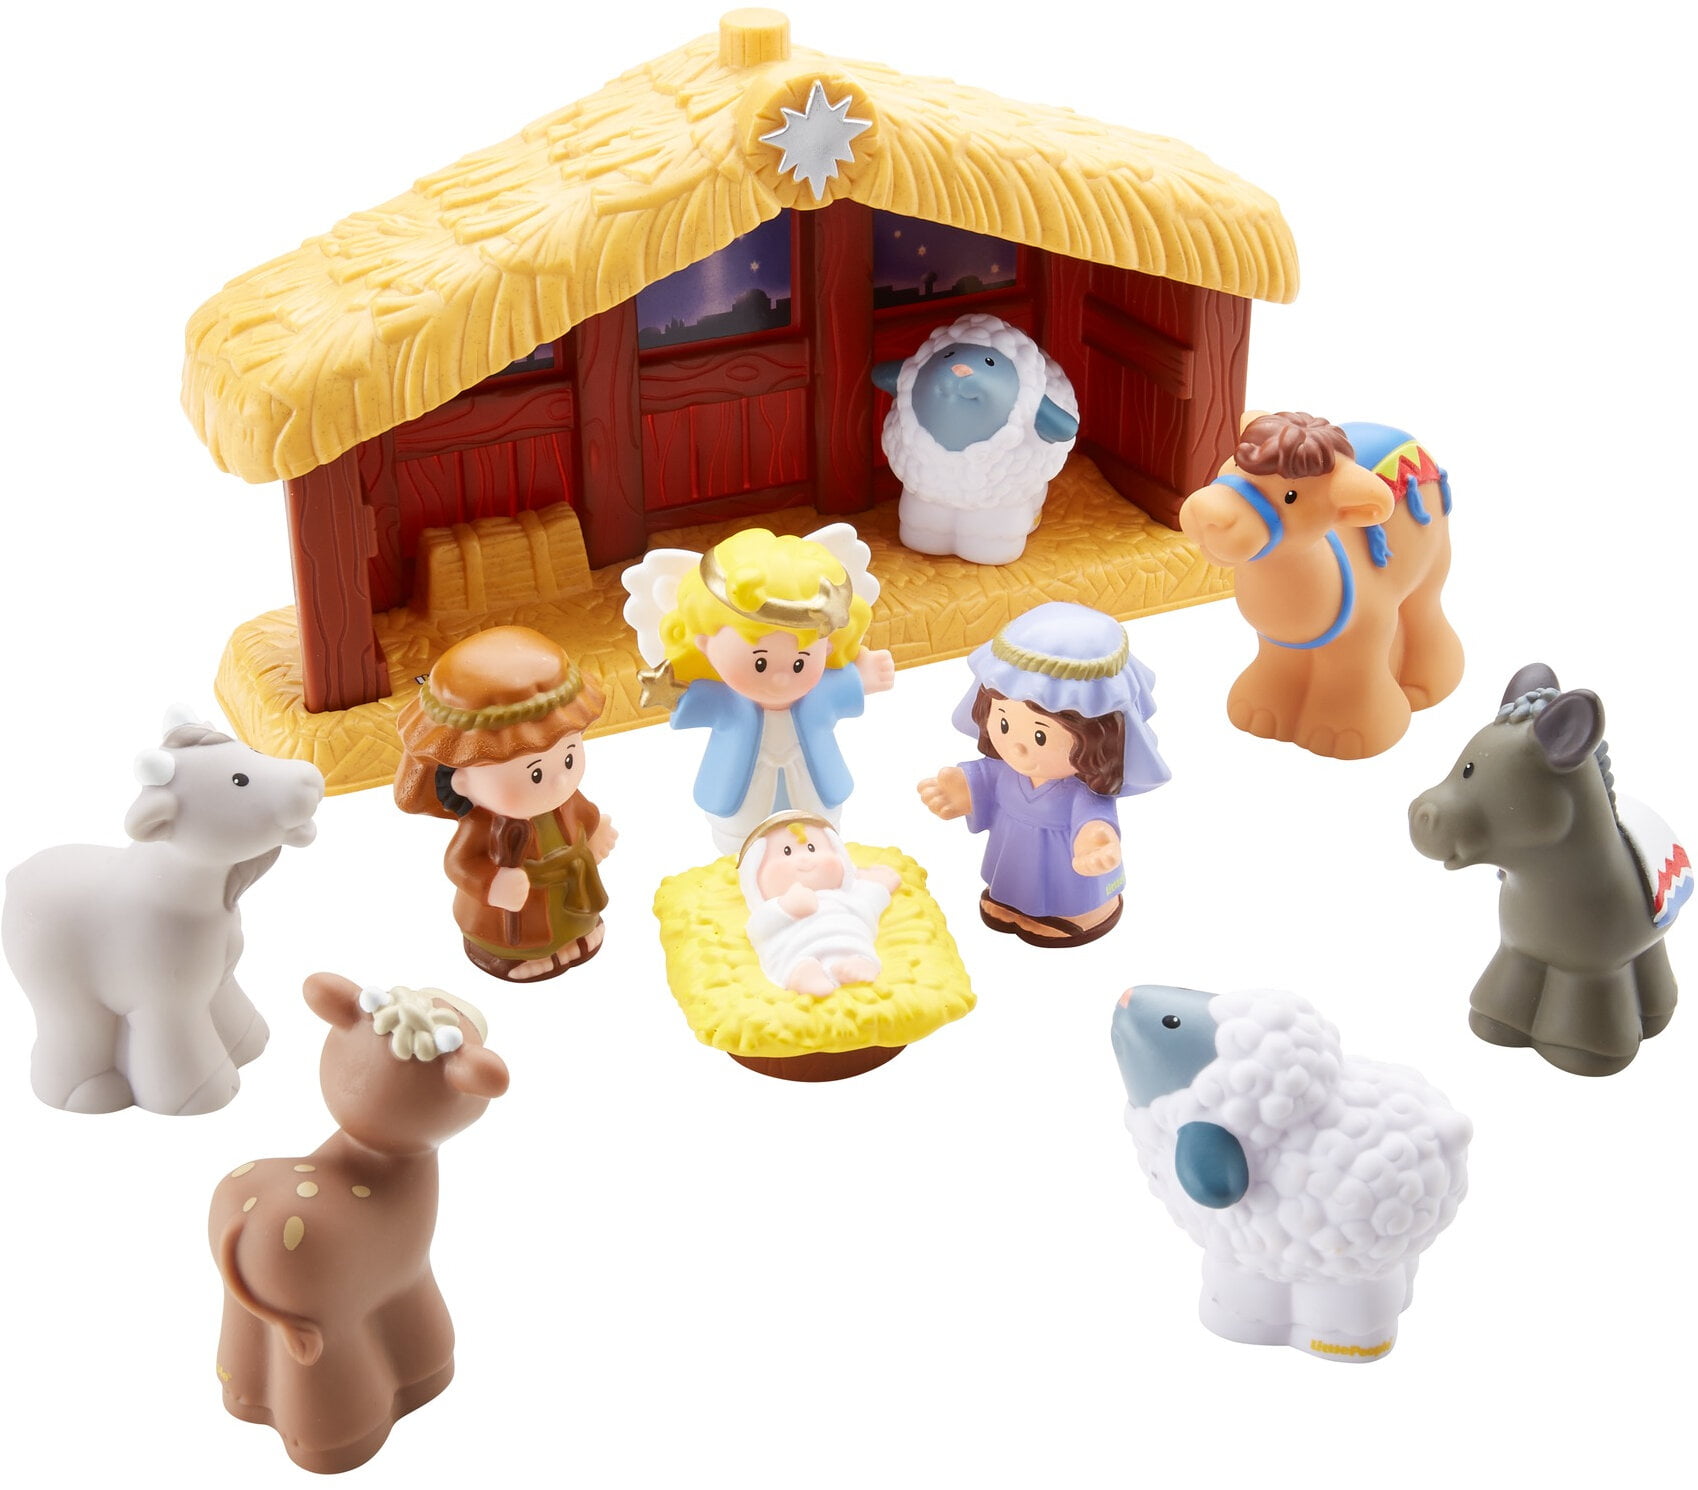 J2404 for sale online Fischer Price Little People Christmas Story